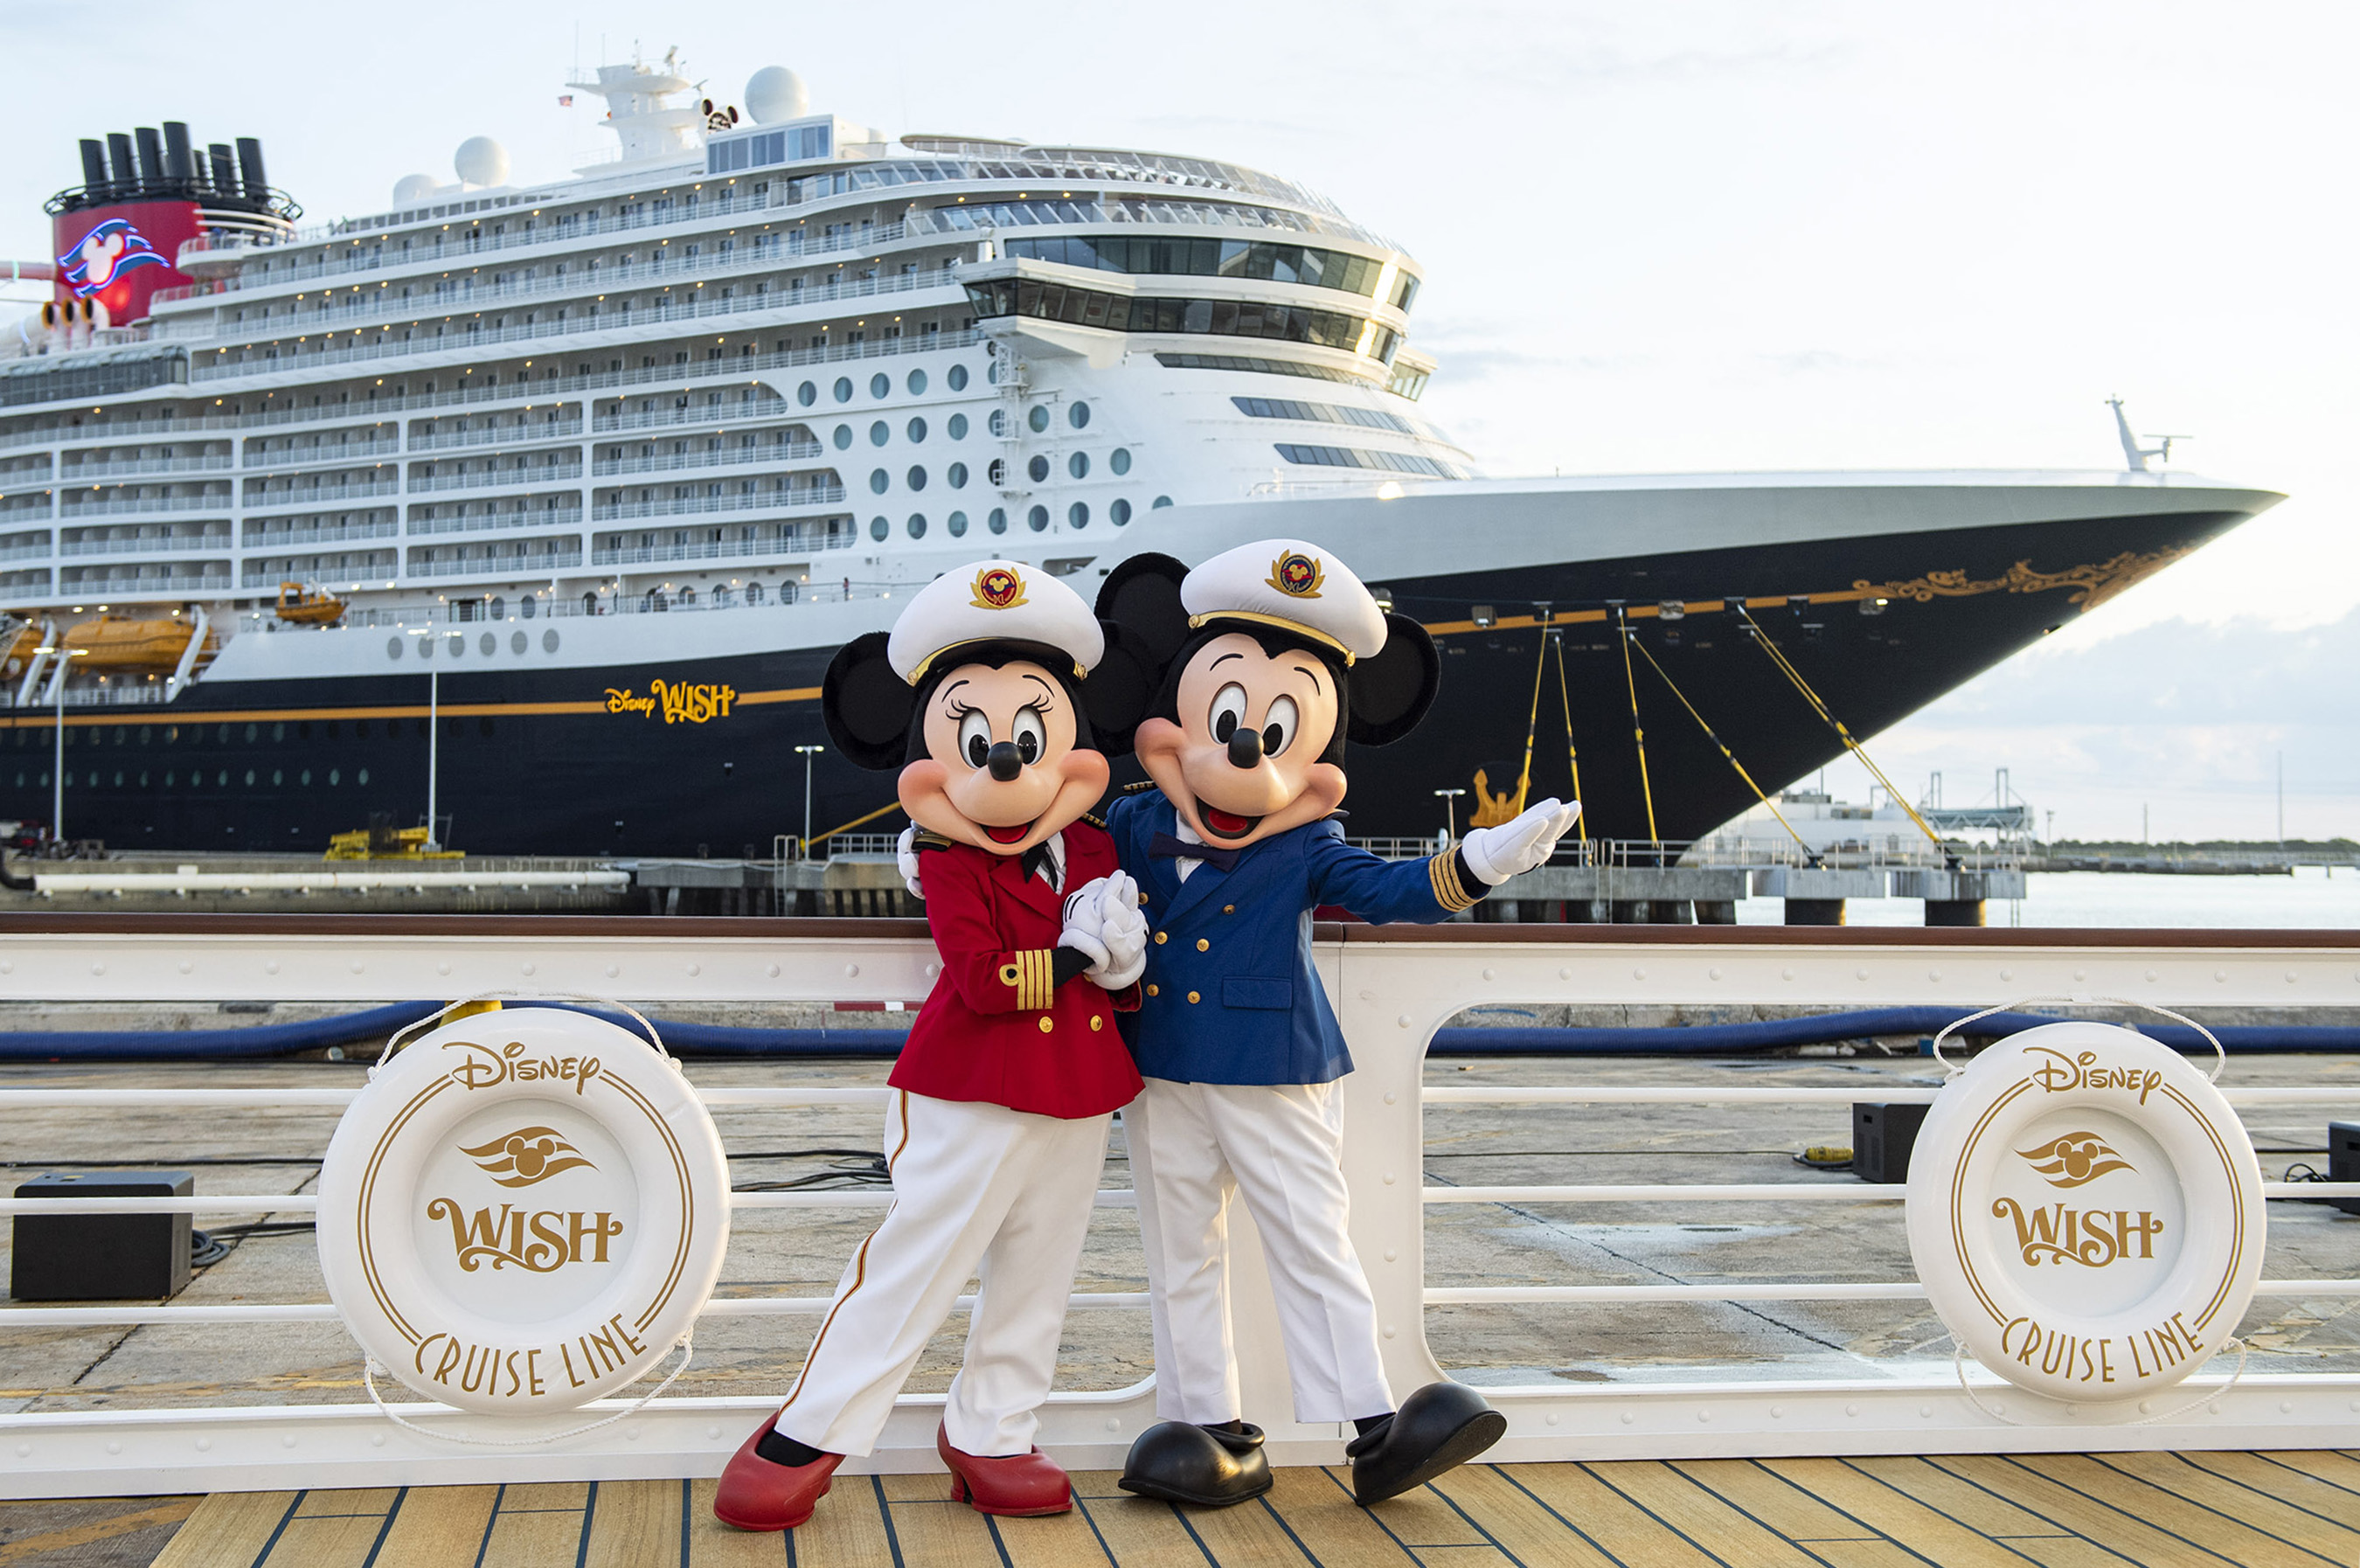 Things You Must Bring on a Disney Cruise, According to Traveler